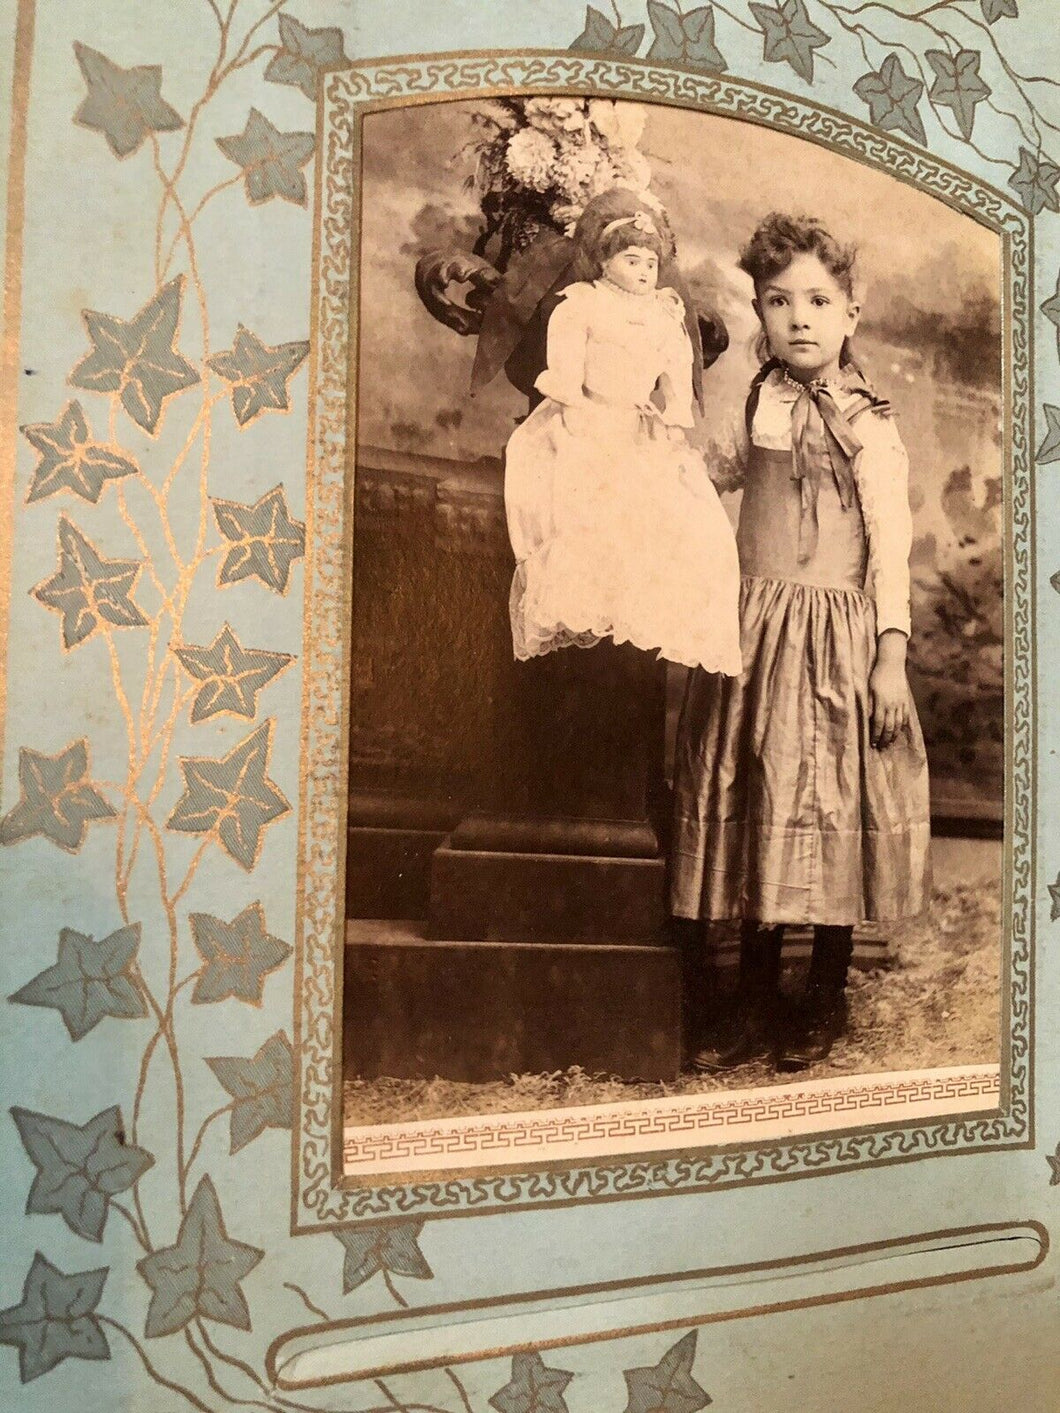 Antique Album 31 Photos Cabinet Cards Tintypes CDVs Girl Holding Doll - Indiana